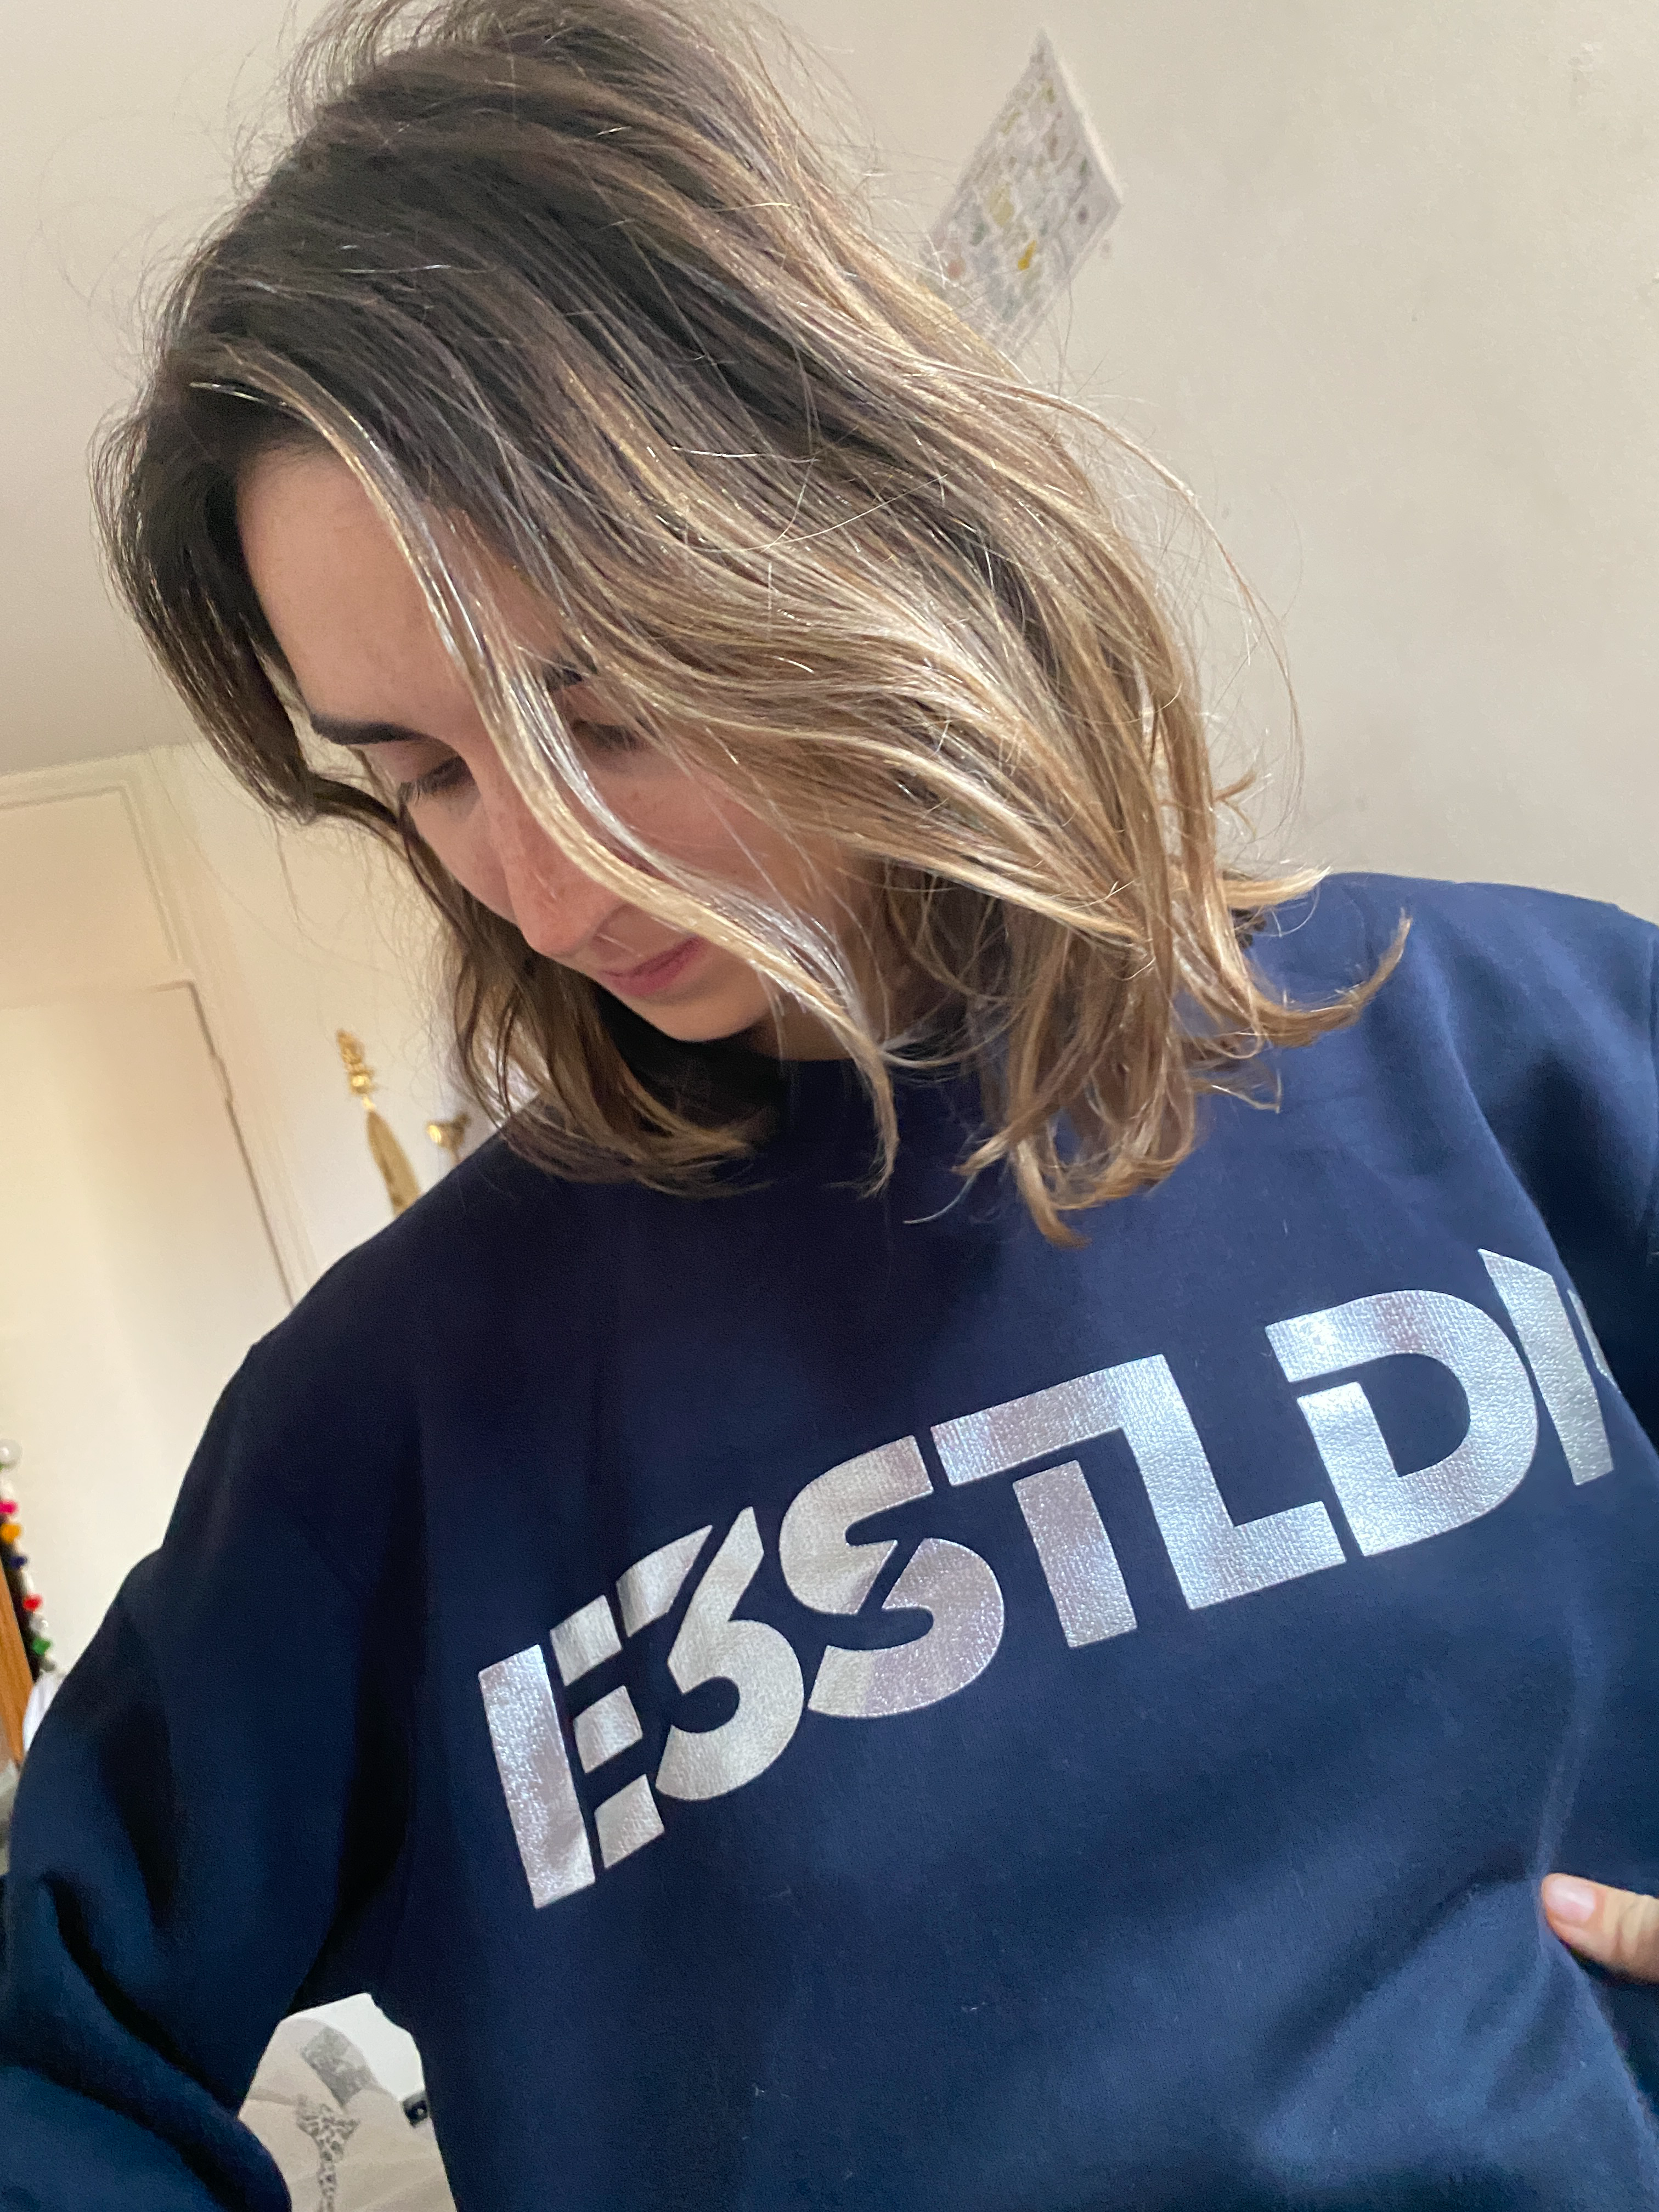 E3STLDN Navy Sweat with silver logo